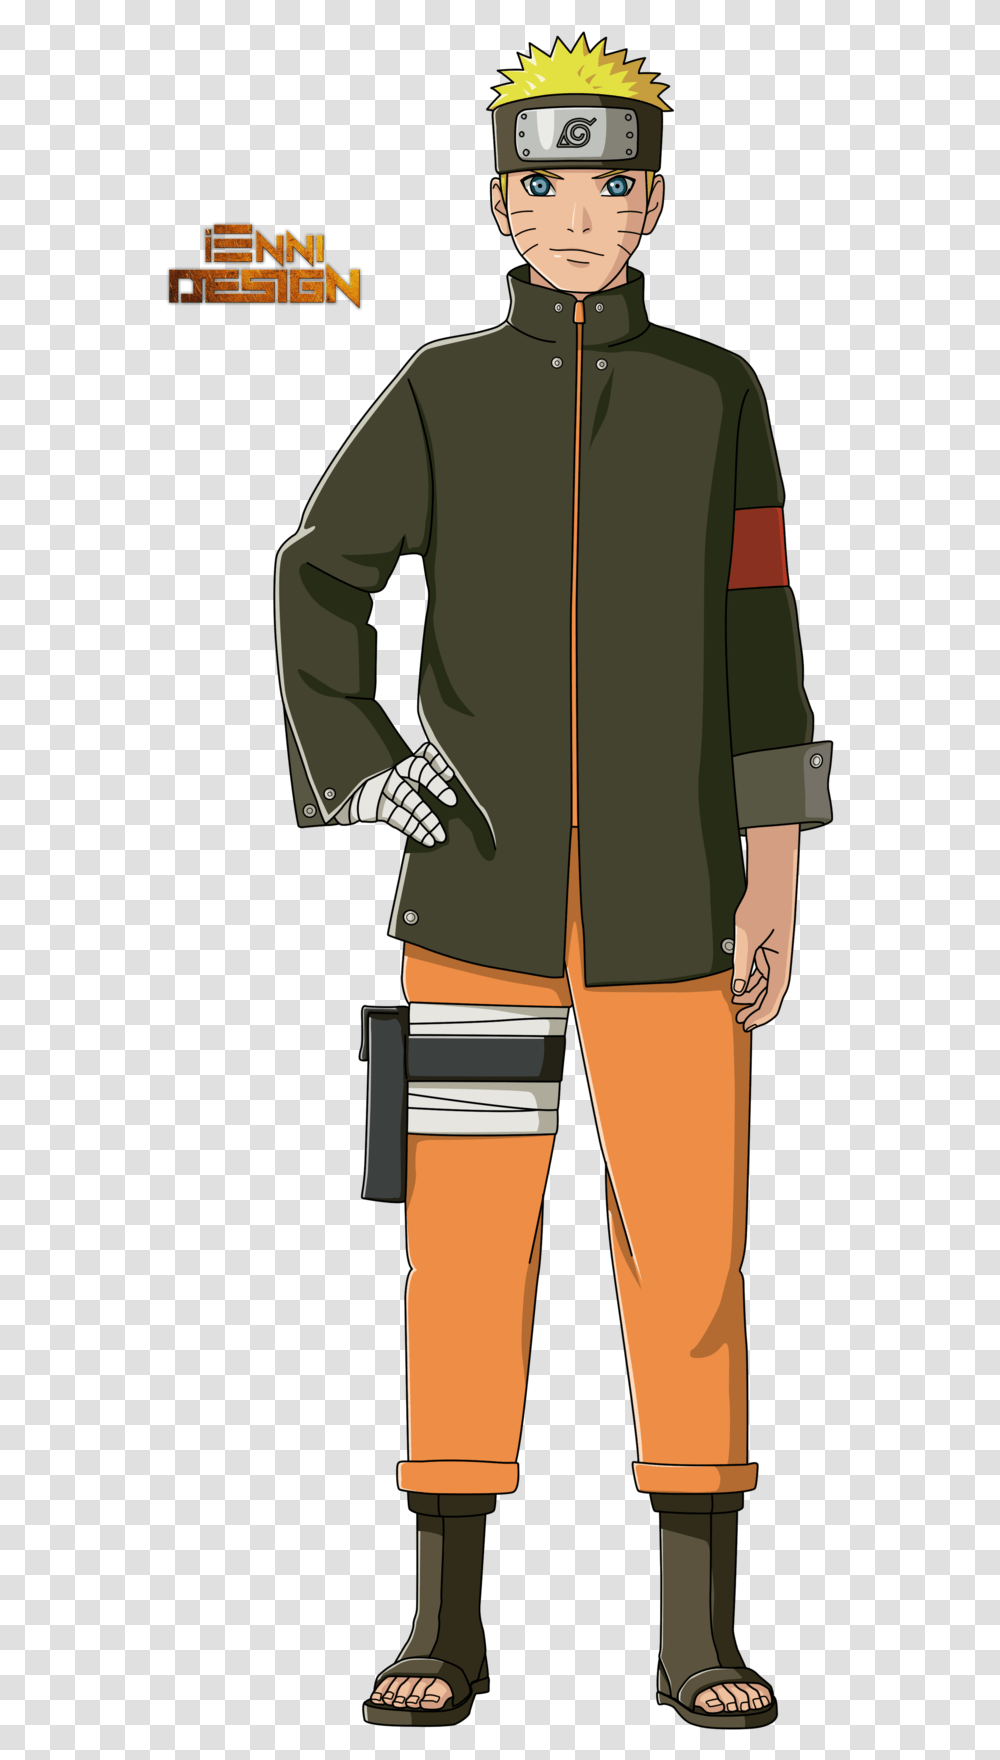 Download Naruto The Last For Designing Naruto Uzumaki Naruto The Last, Person, Sleeve, Coat Transparent Png